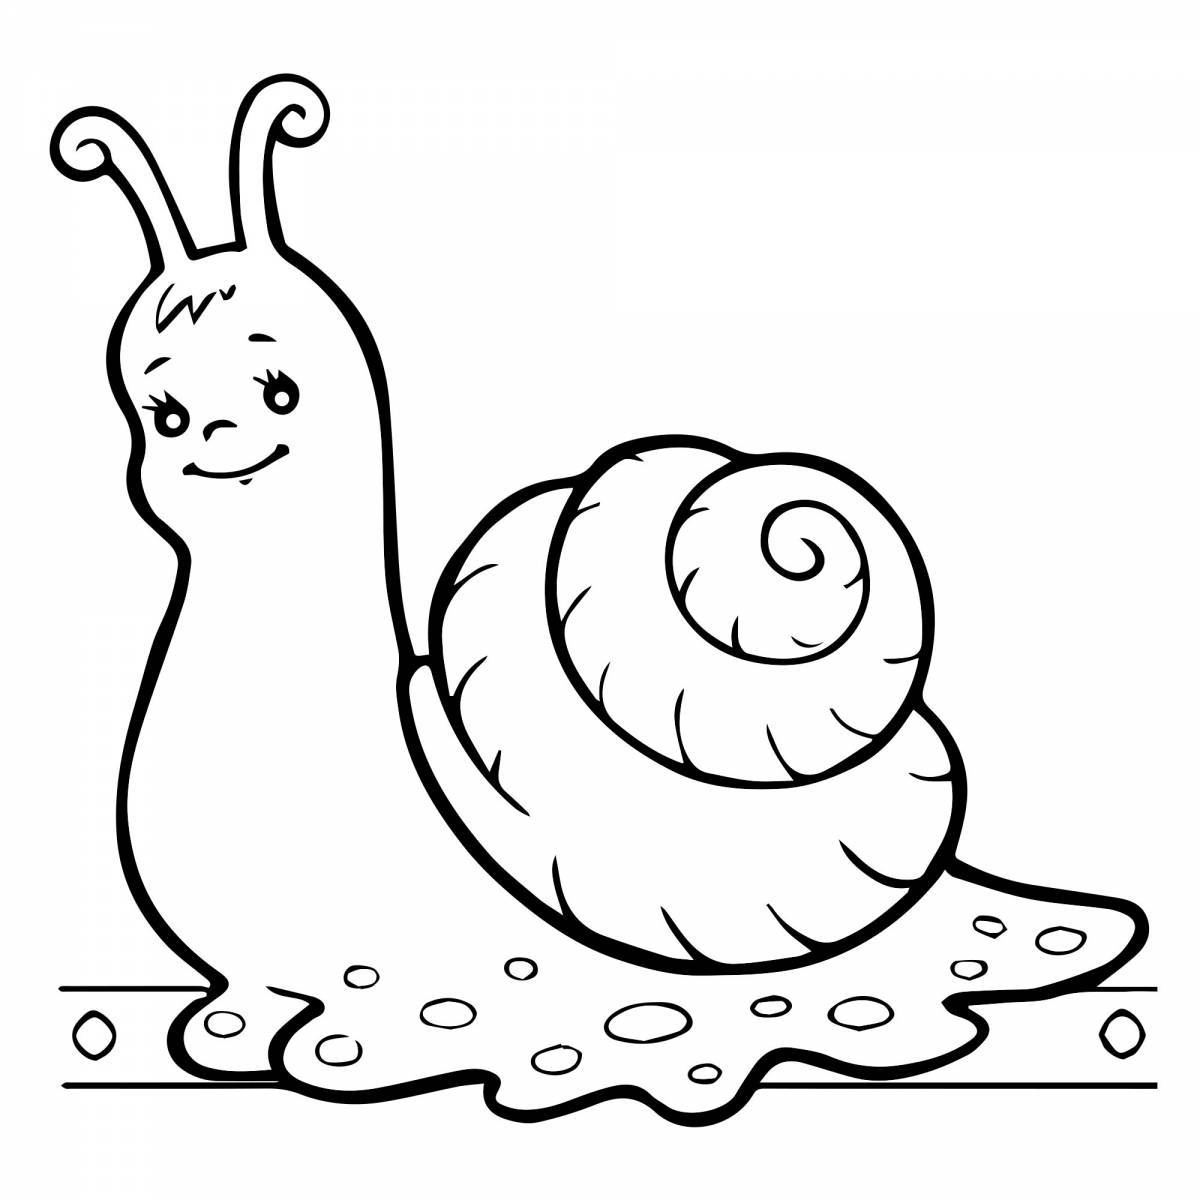 Inspirational snail coloring book for kids